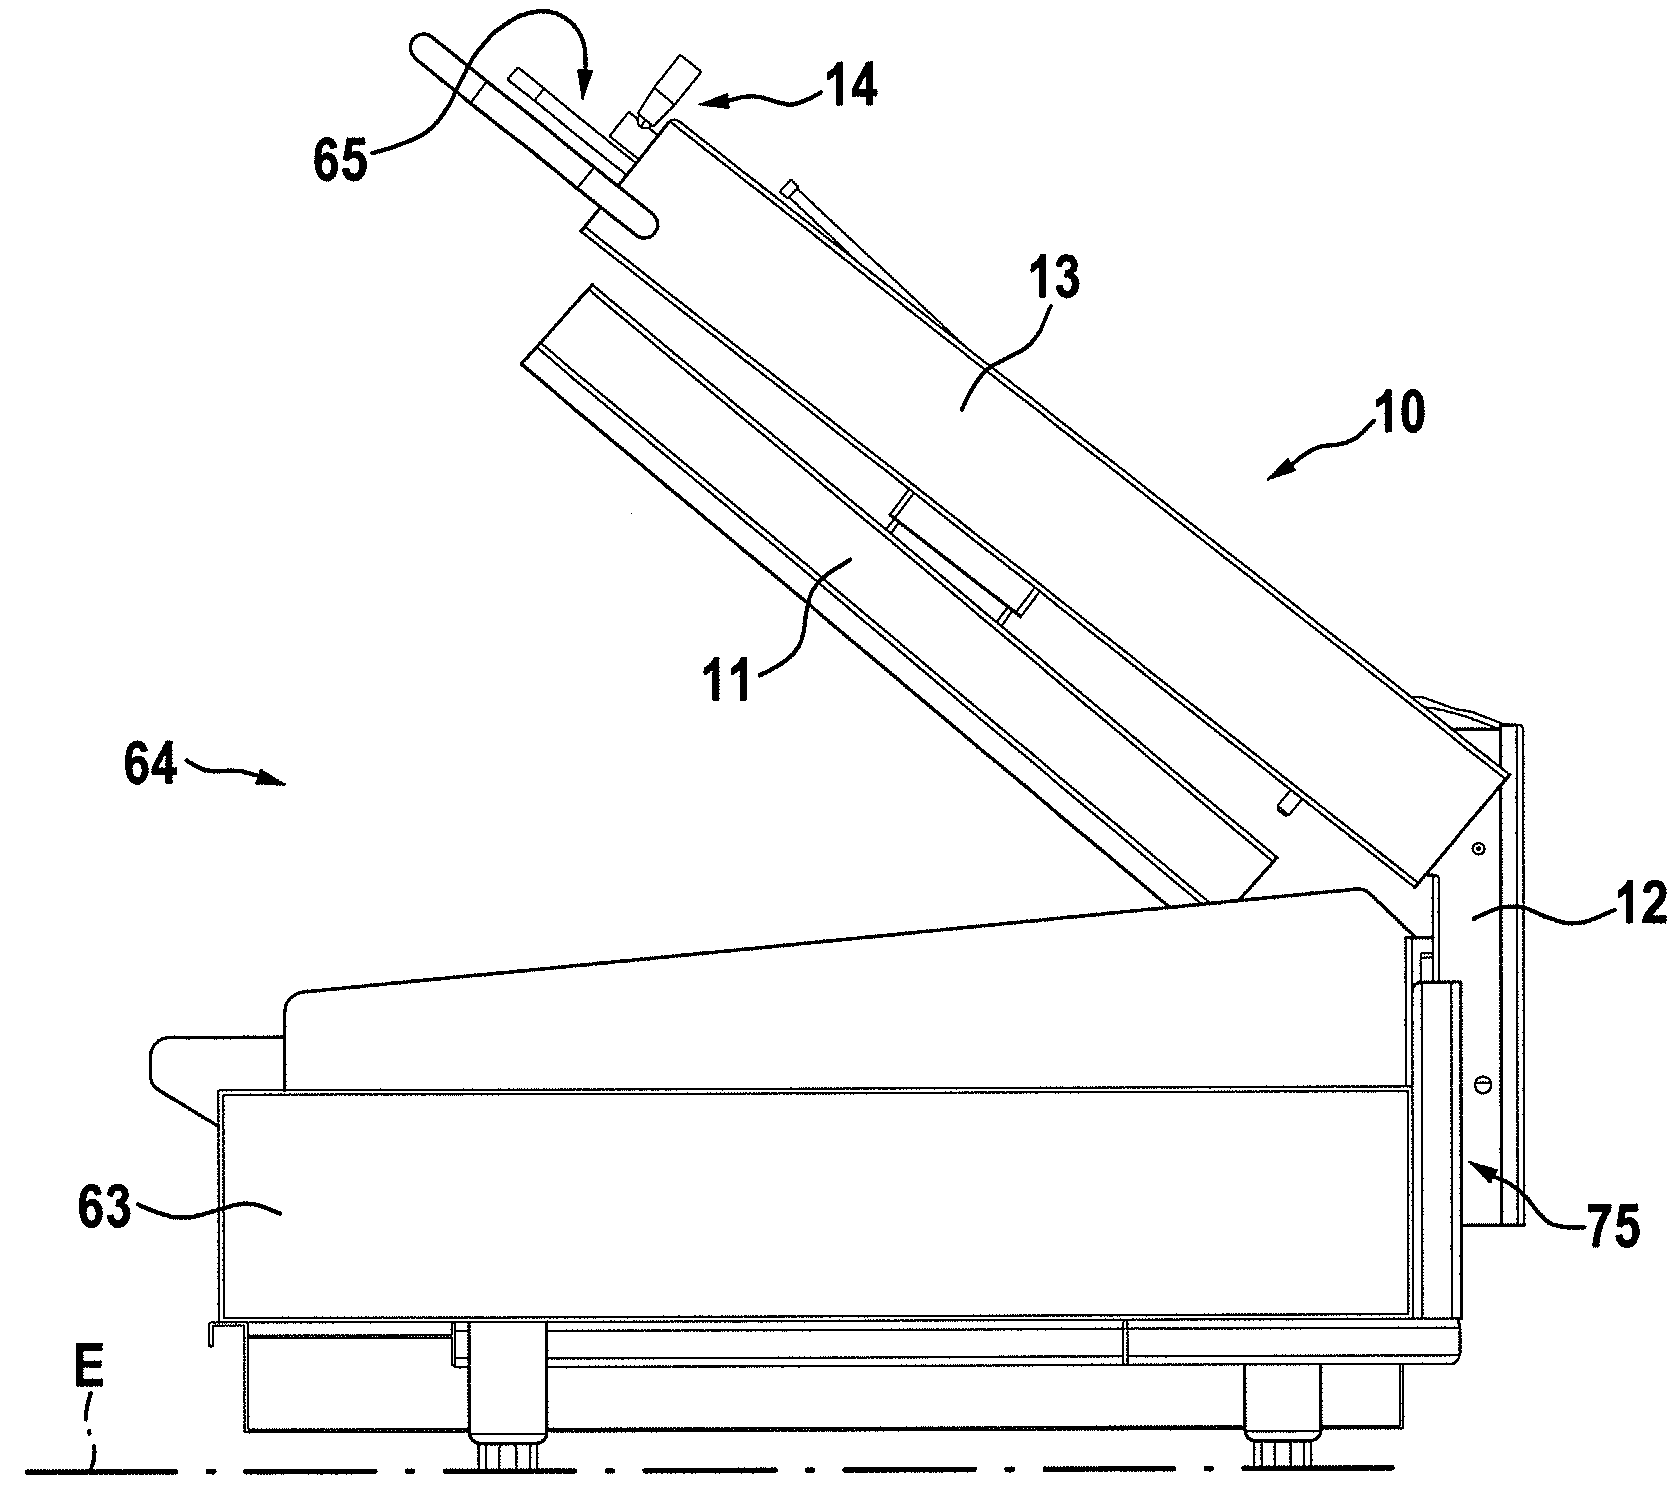 Centre arm for holding an upper contact grilling or roasting plate as well as contact grilling or roasting devices with such a centre arm